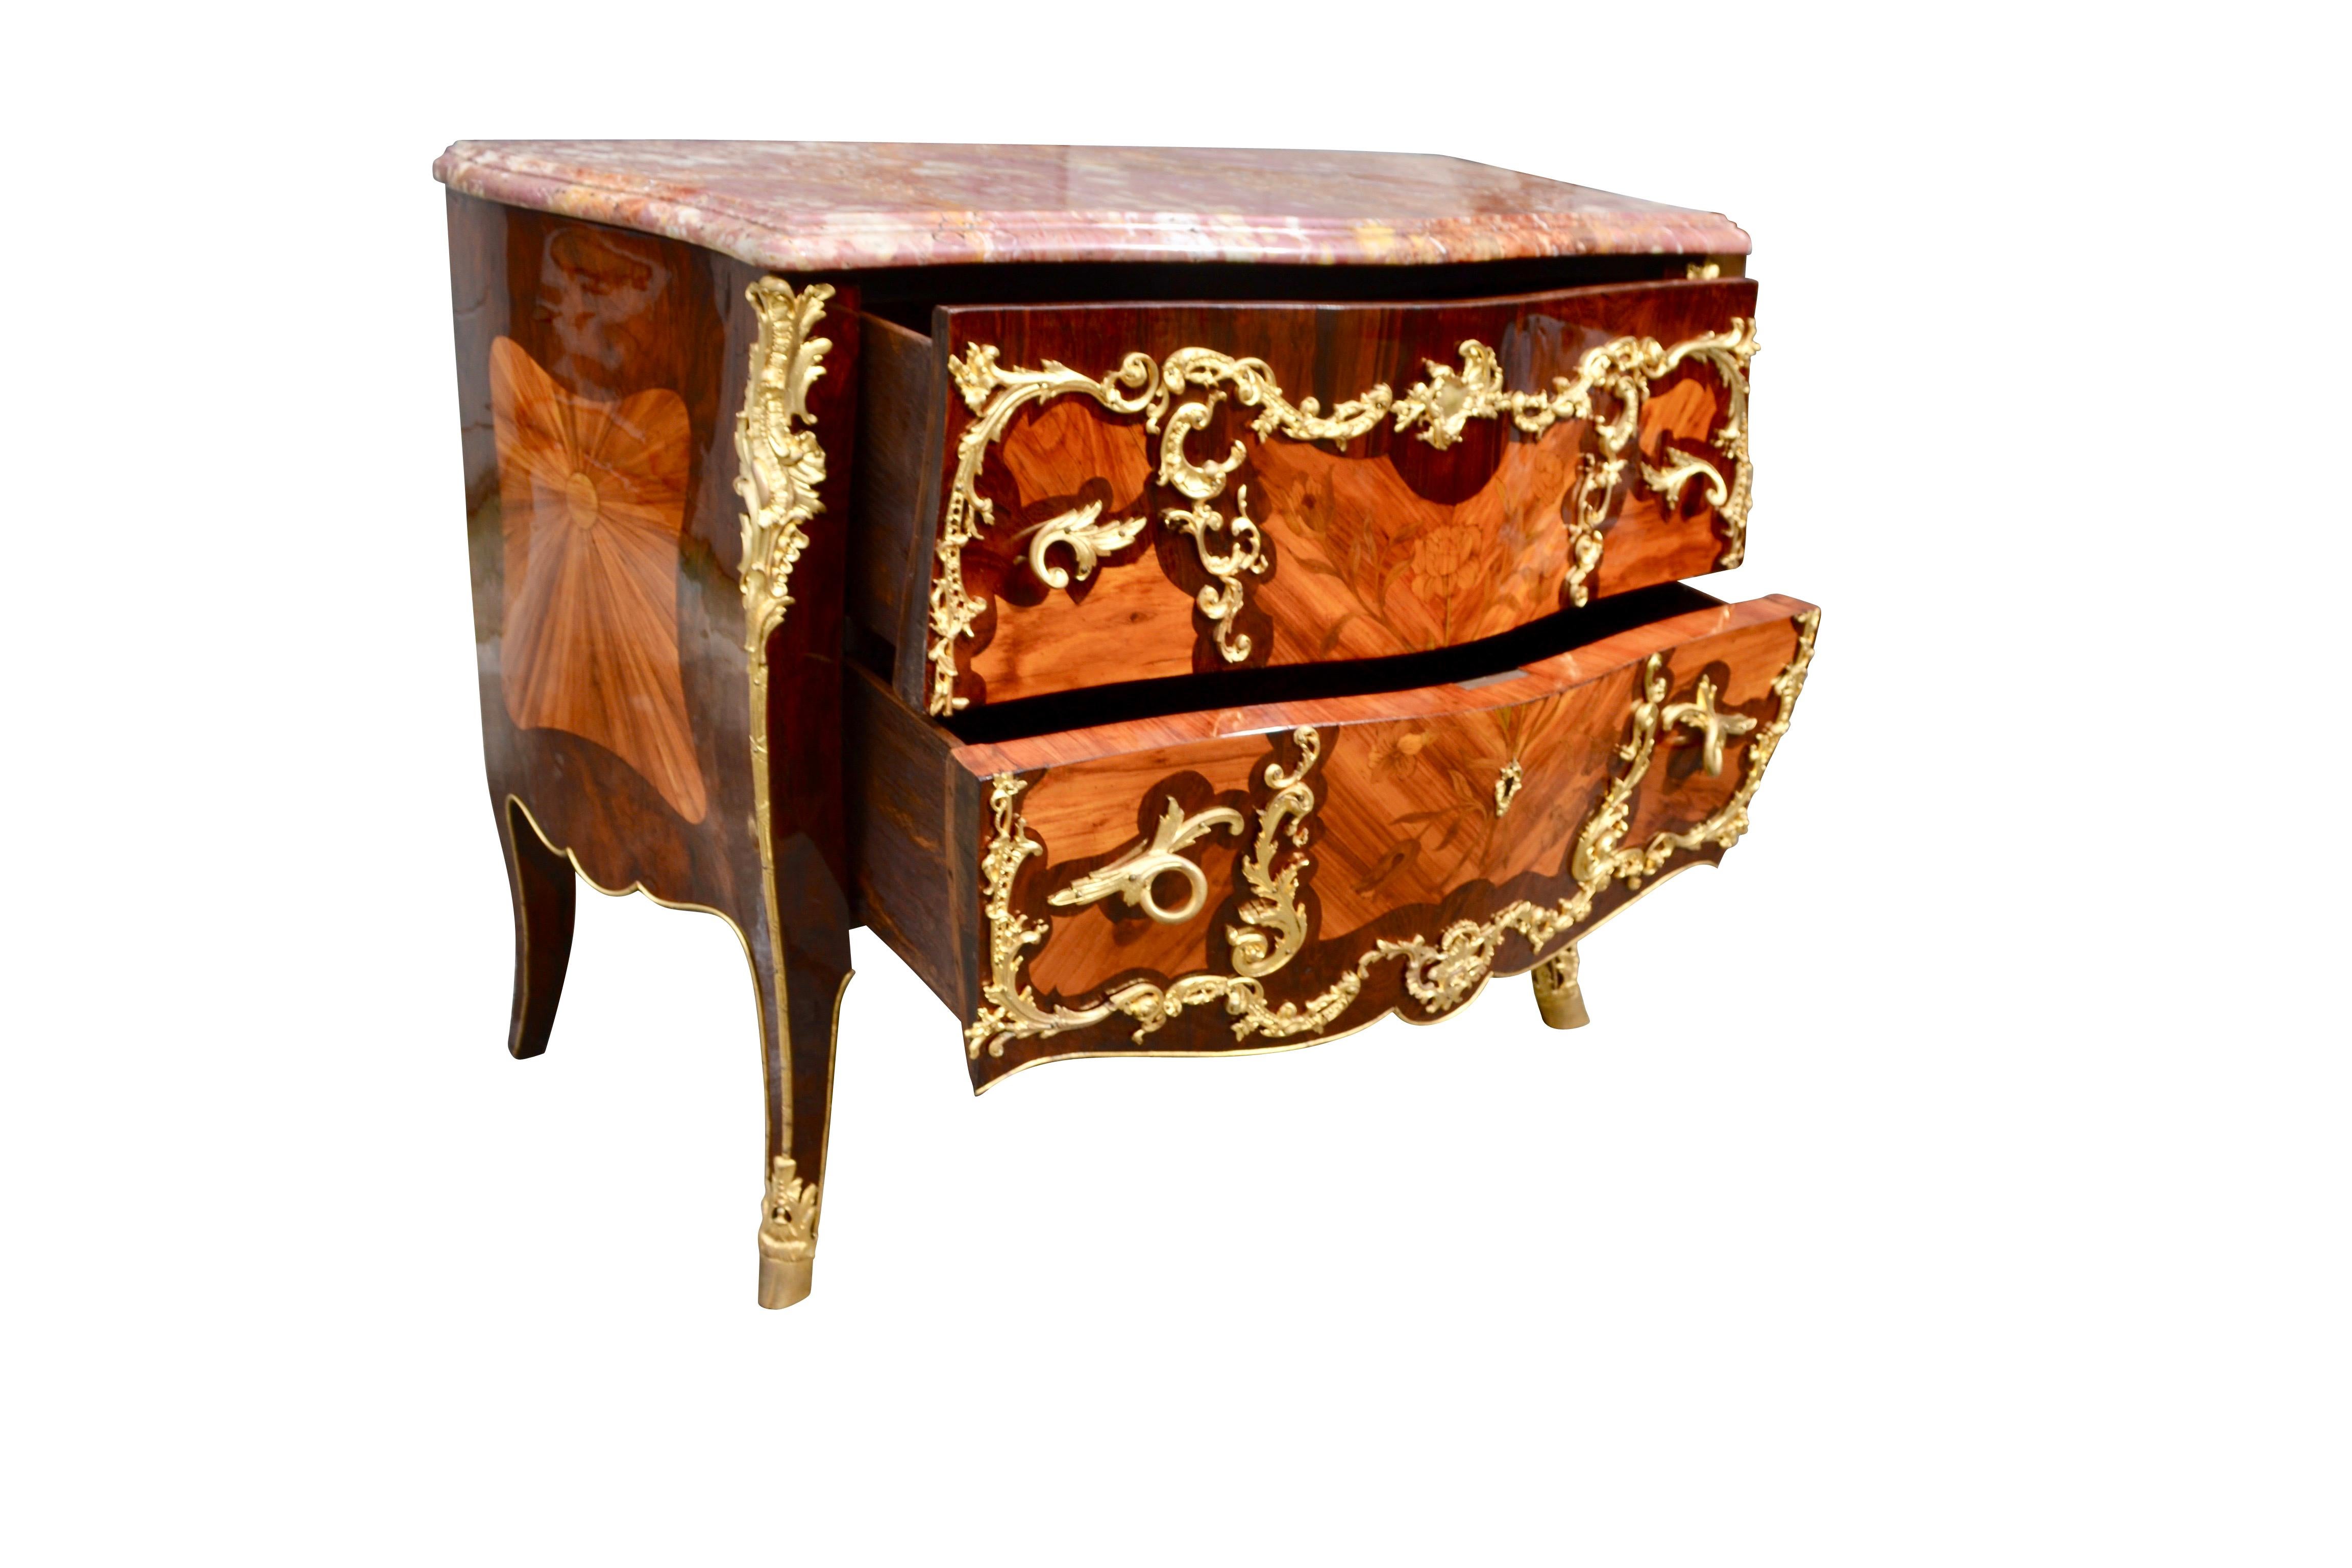 19th Century French Louis XV Style Marquetry and Ormolu Bombe Chest of Drawers For Sale 1